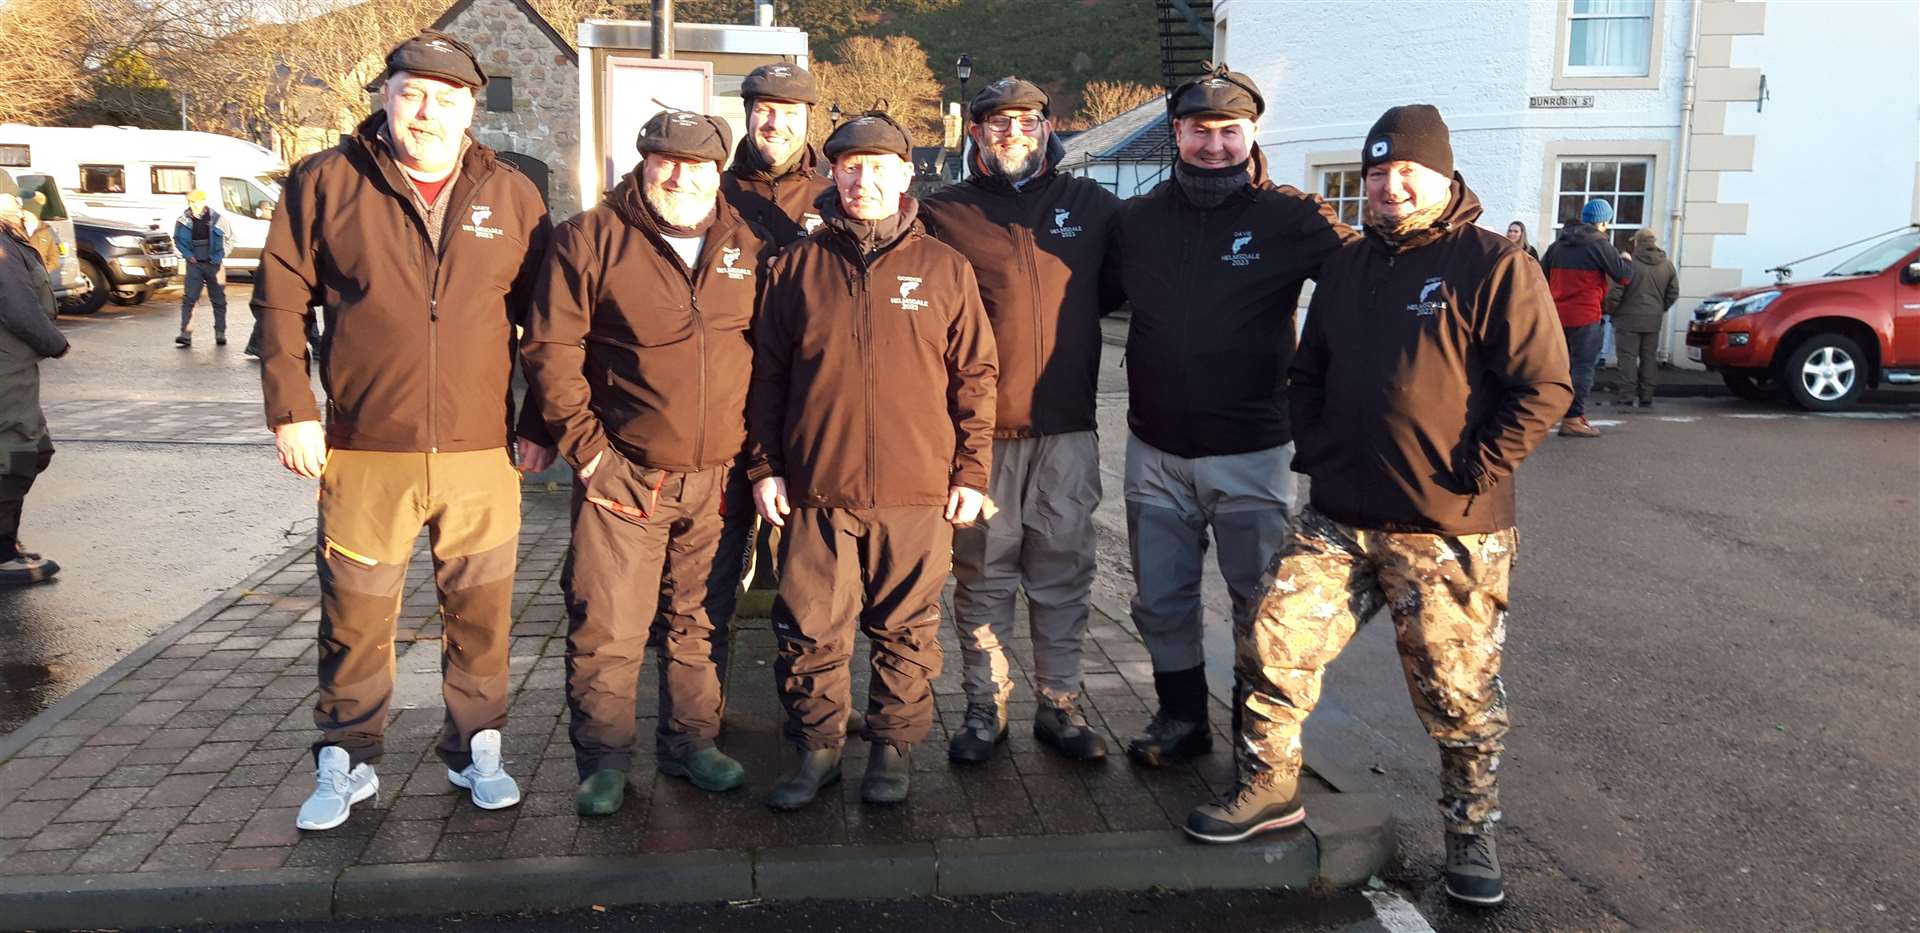 These seven friends from Glasgow and Lincolnshire have been at the opening every year for the last 10 years. They even have matching jackets and hats made every year.